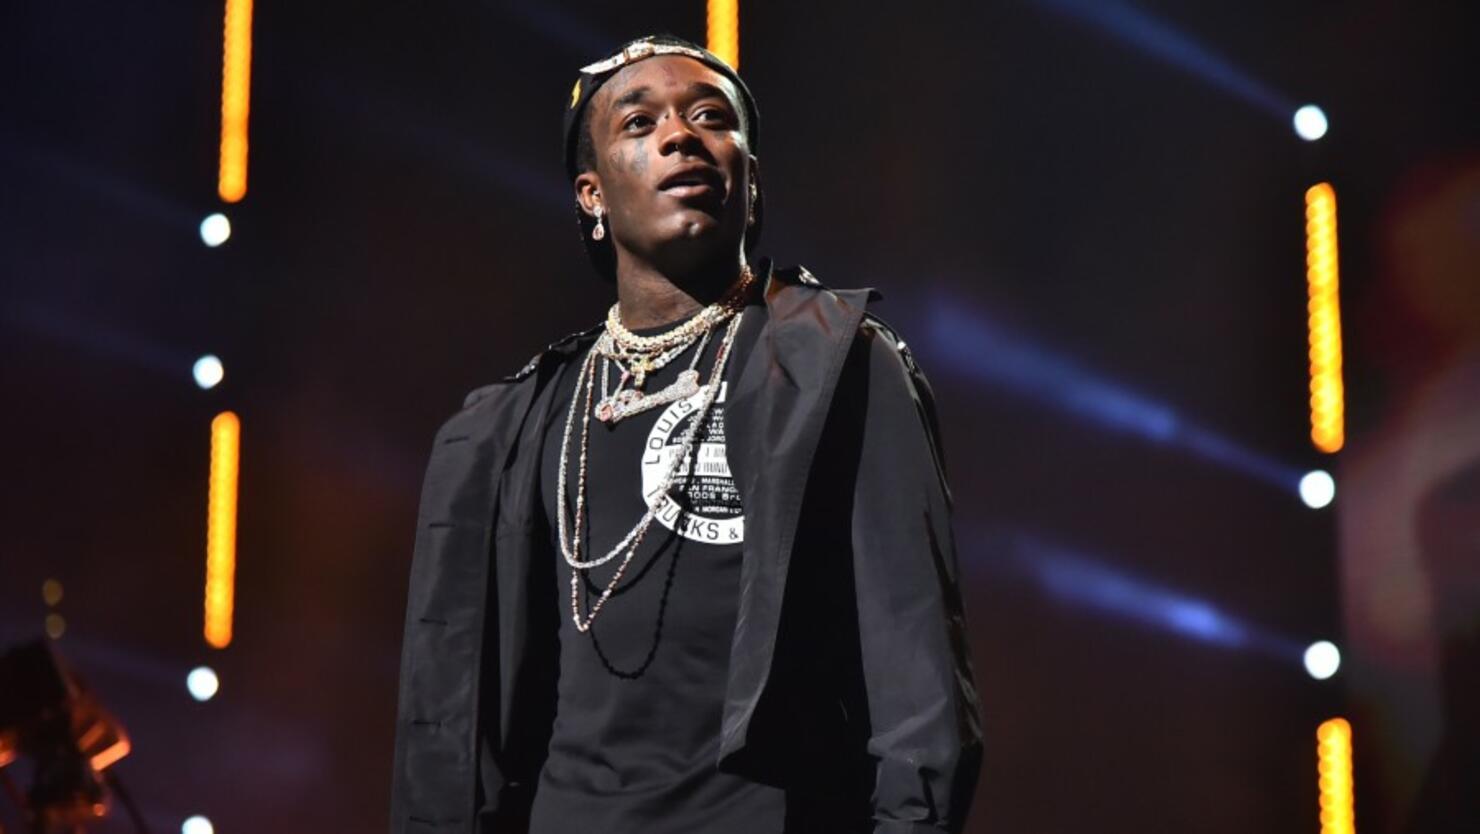 Lil Uzi Vert Just Found Out He #39 s A Year Younger Than He Believed iHeart